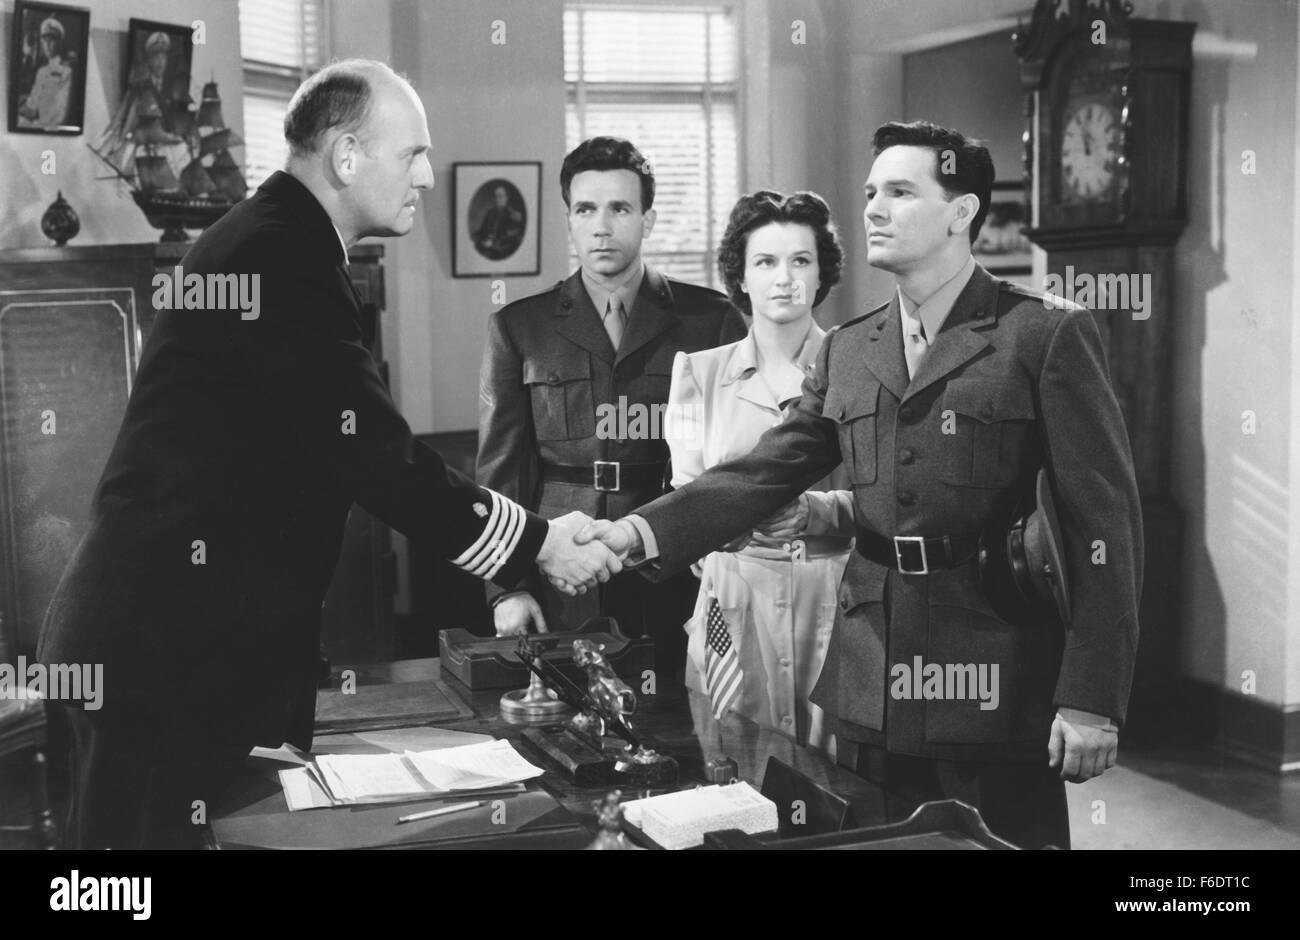 RELEASE DATE: August 24, 1945. MOVIE TITLE: Pride of the Marines. STUDIO: Warner Bros. Pictures. PLOT: Married couple Jim & Ella Merchant set up their single friend Al Schmid on a blind date with Ruth Hartley. The two hit it off and begin dating. A welder, one day at the workplace, Al learns of a friend's enlistment in the Marine Corps and decides to join himself. Al and Ruth have a last date, with Al insisting that she forget about him as he is about to go into combat. However, when Ruth goes to meet his departure train, he is overjoyed and gives her an engagement ring. Assigned to Guadalcana Stock Photo